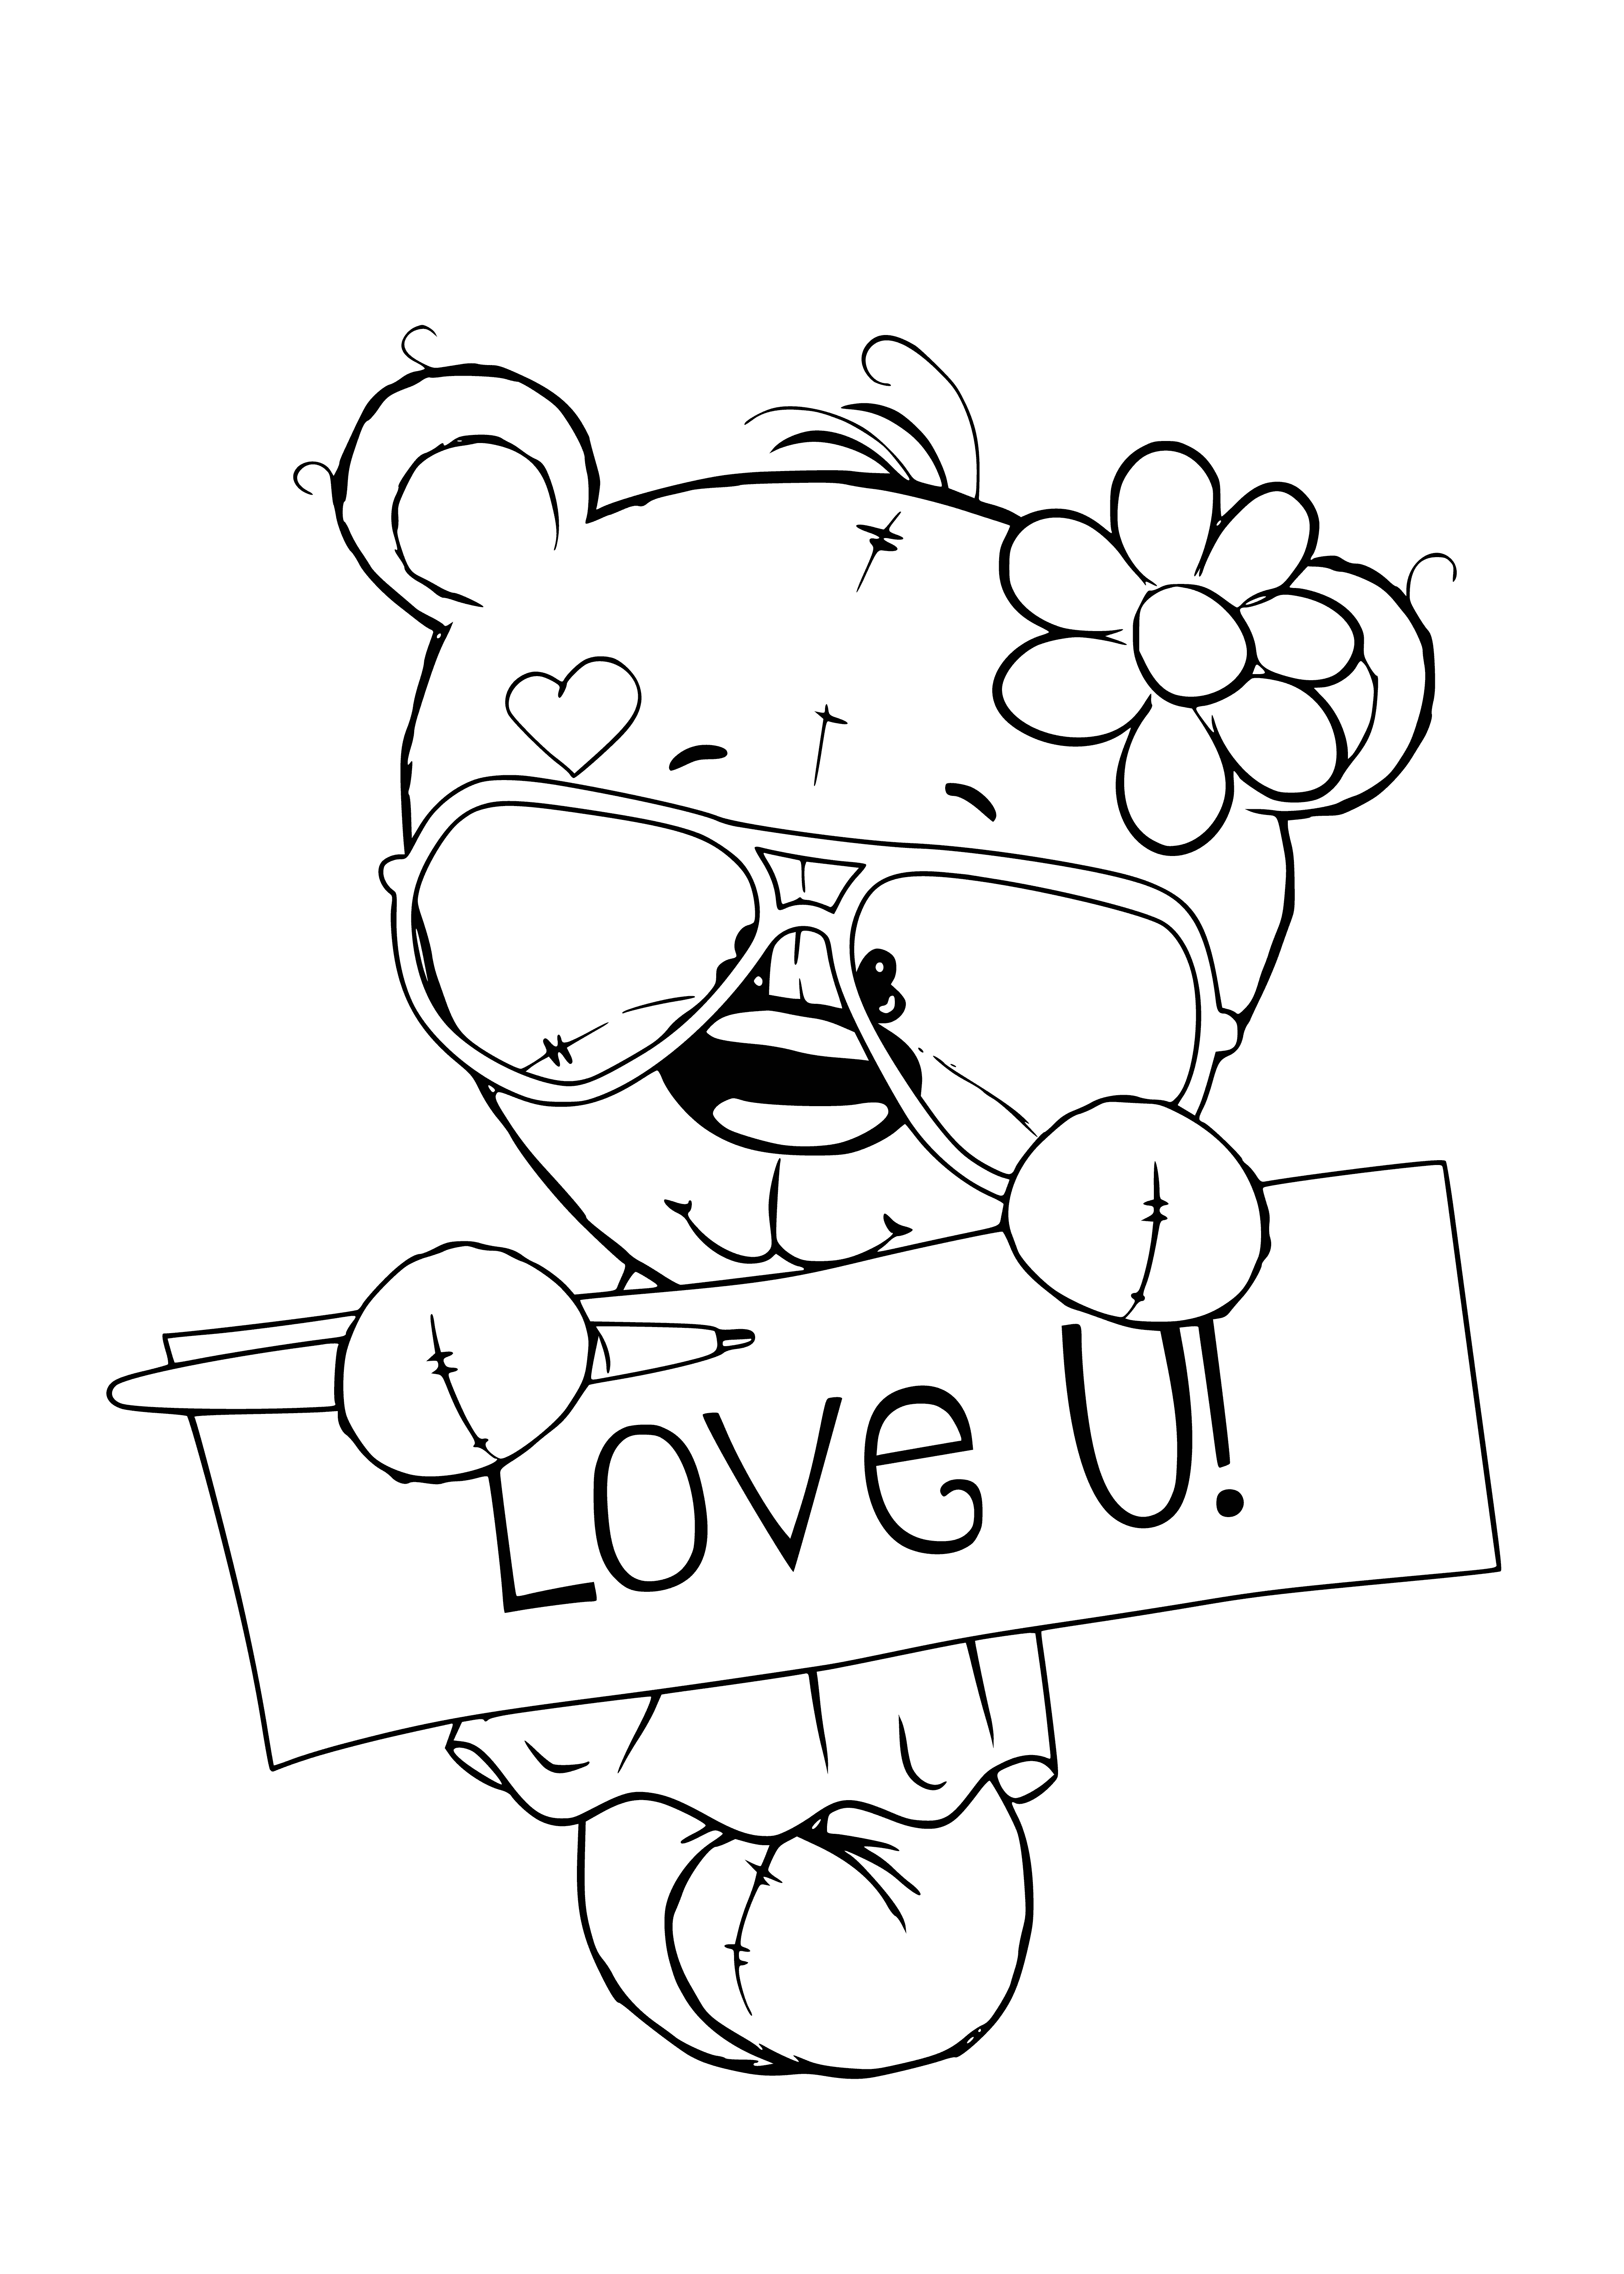 coloring page: Two Kawaii girls sit together, one holds flowers & the other a heart-shaped balloon - both smiling with joy.